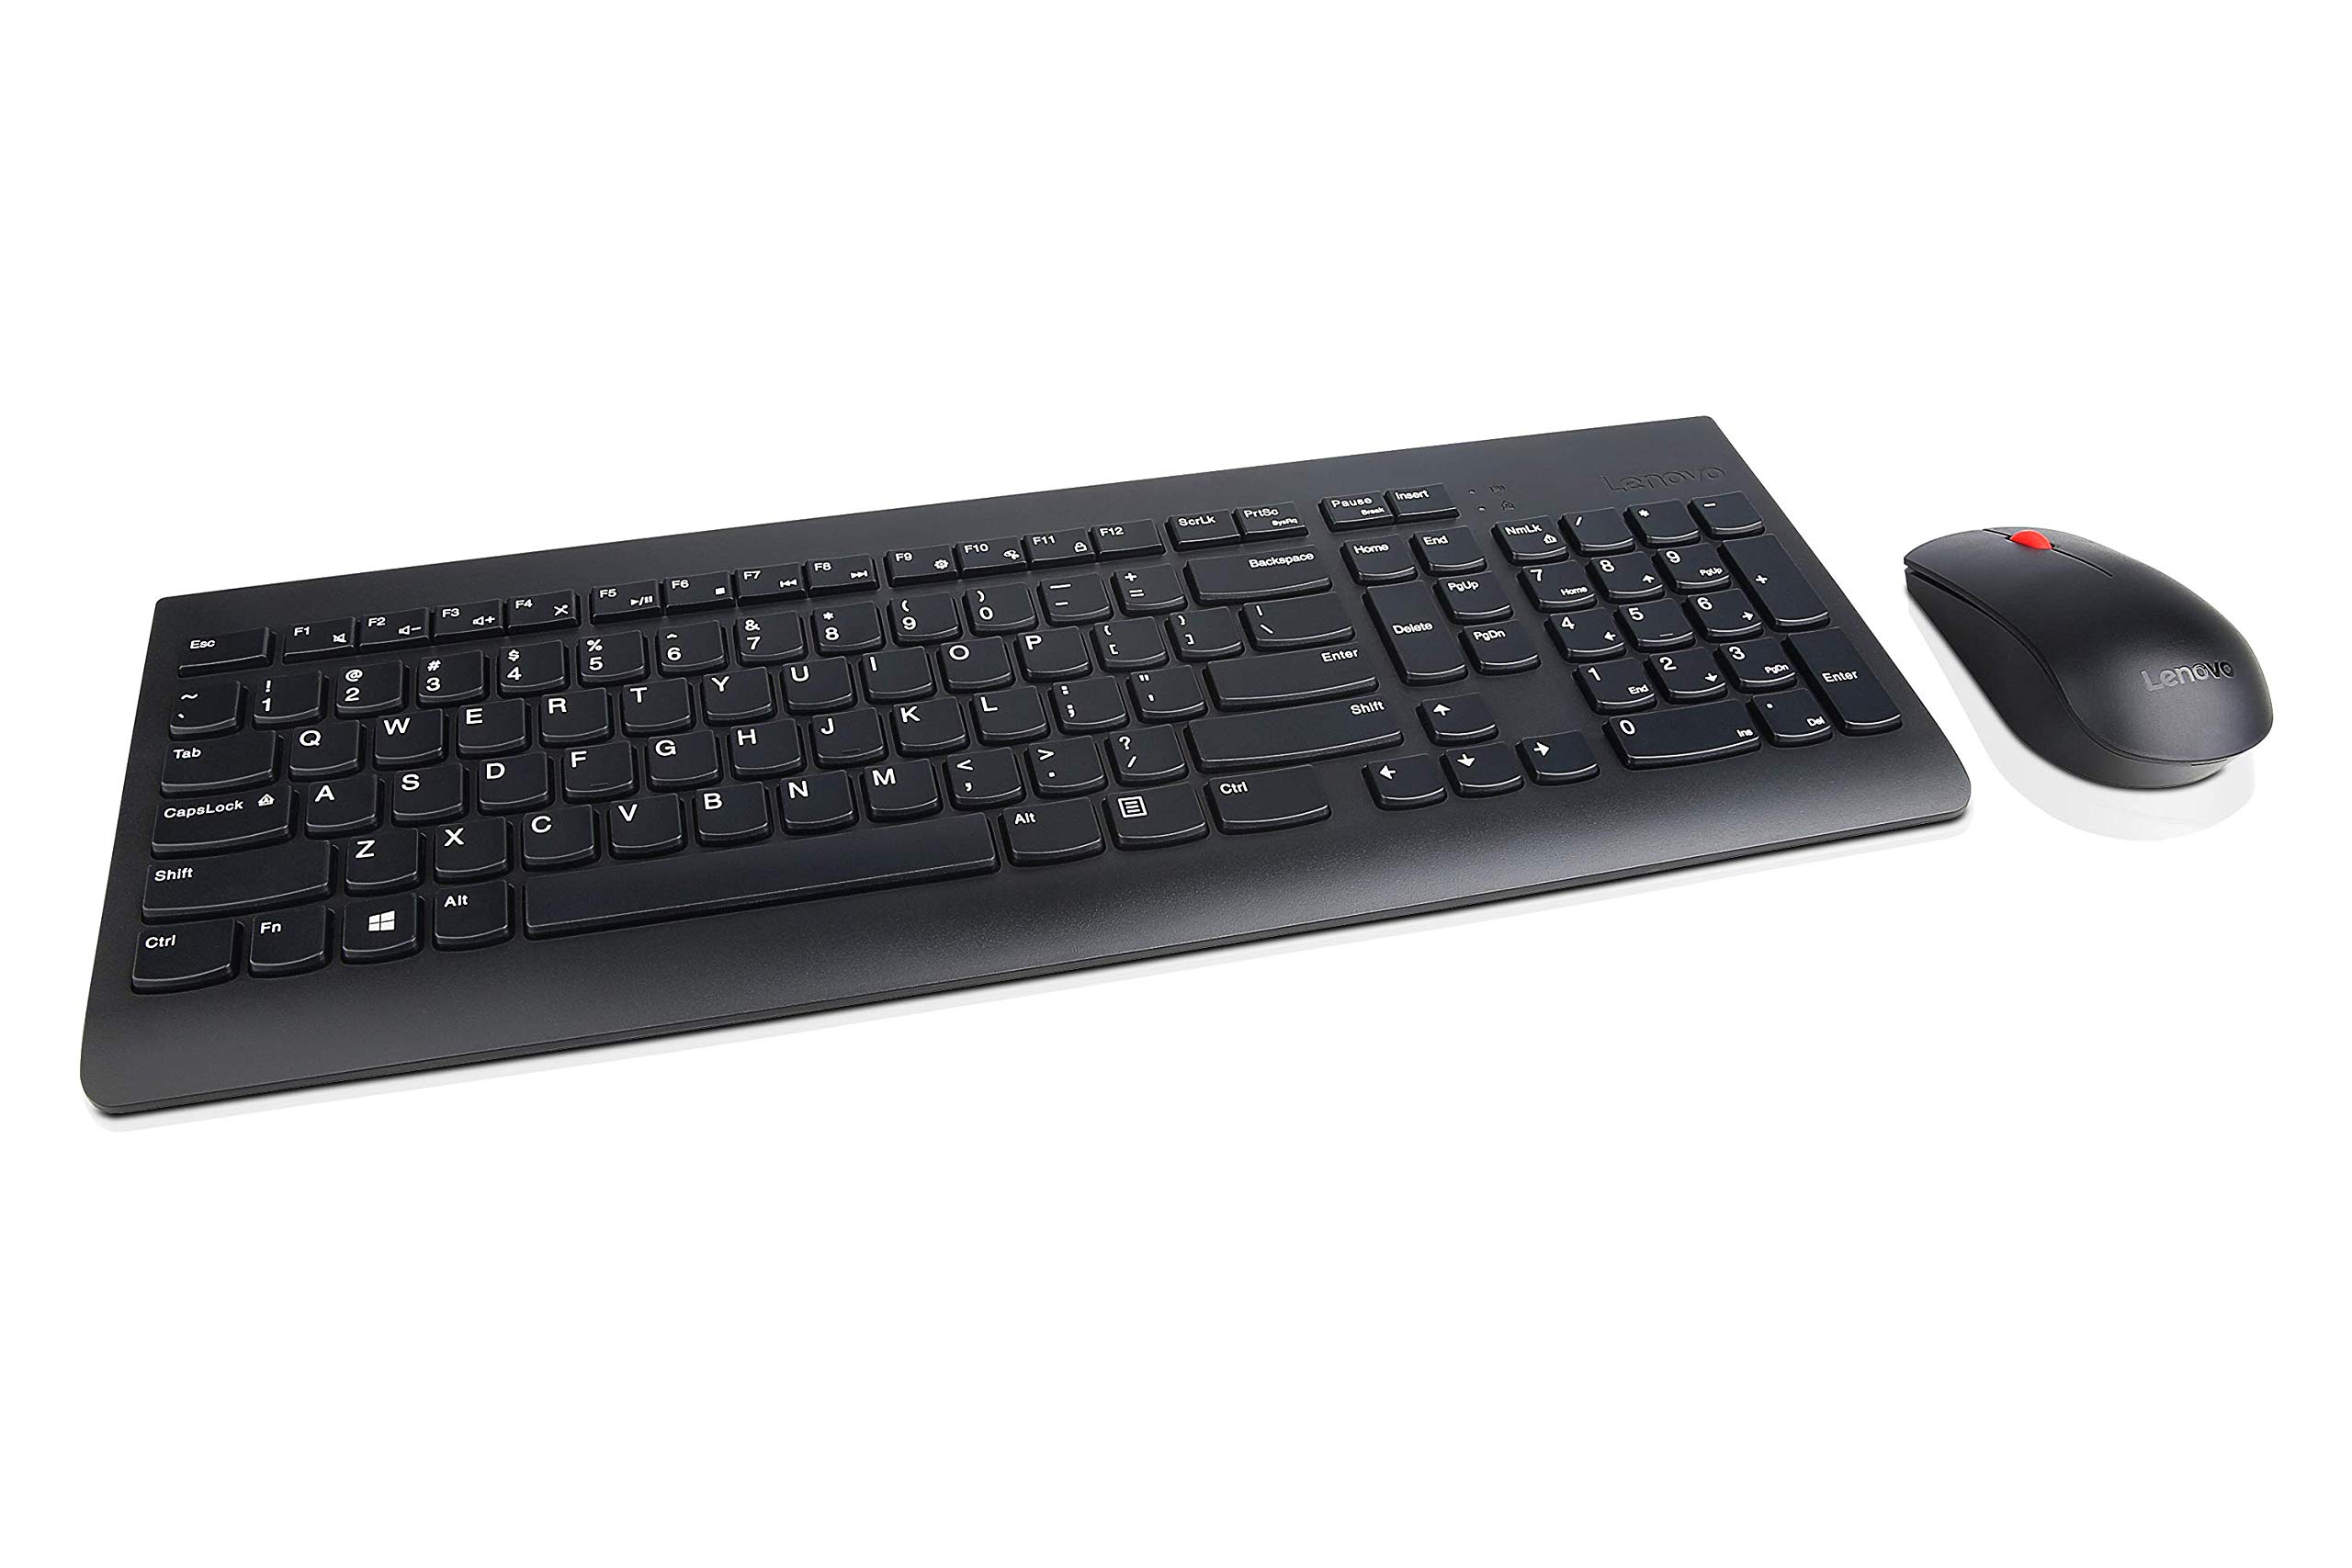 Lenovo USB-C 7-in-1 Hub & 510 Wireless Keyboard & Mouse Combo, 2.4 GHz Nano USB Receiver, Full Size, Island Key Design, Left or Right Hand, 1200 DPI Optical Mouse, GX30N81775, Black